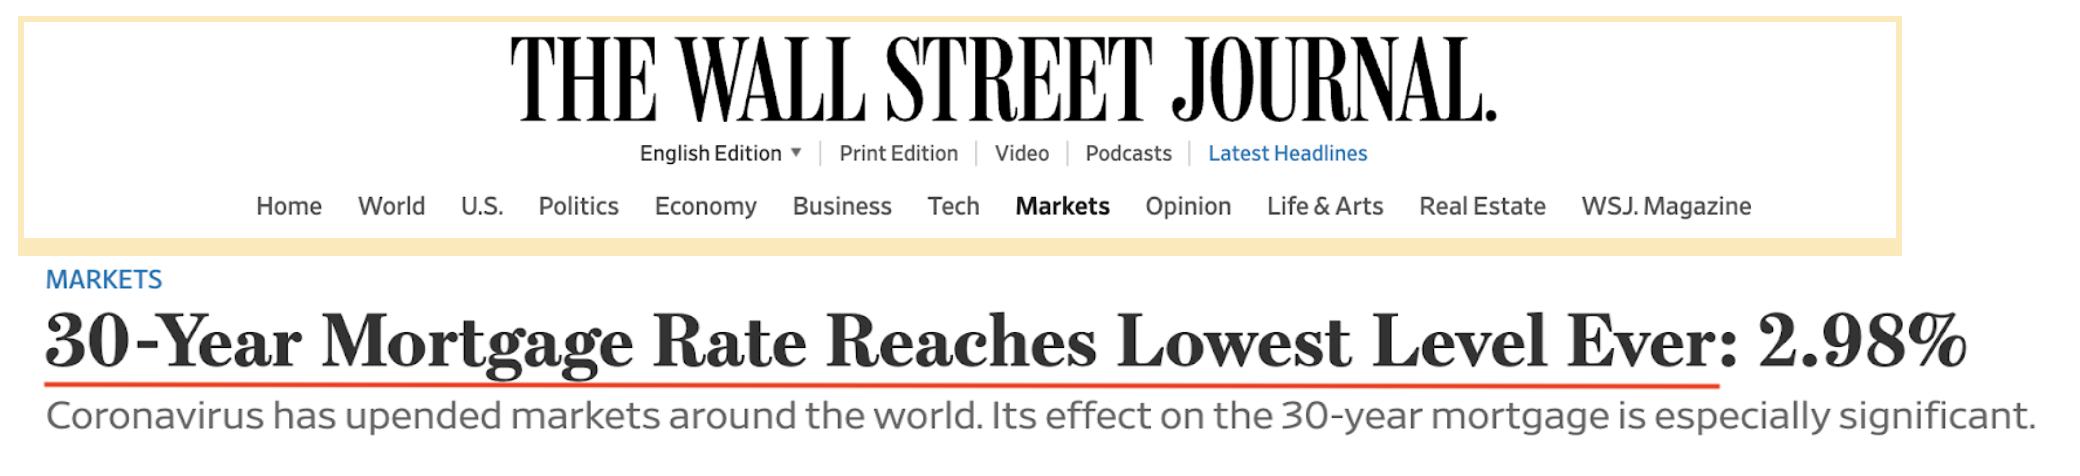 Wall Street Journal 30 Year Mortgage Rates Reach Lowest Point Ever